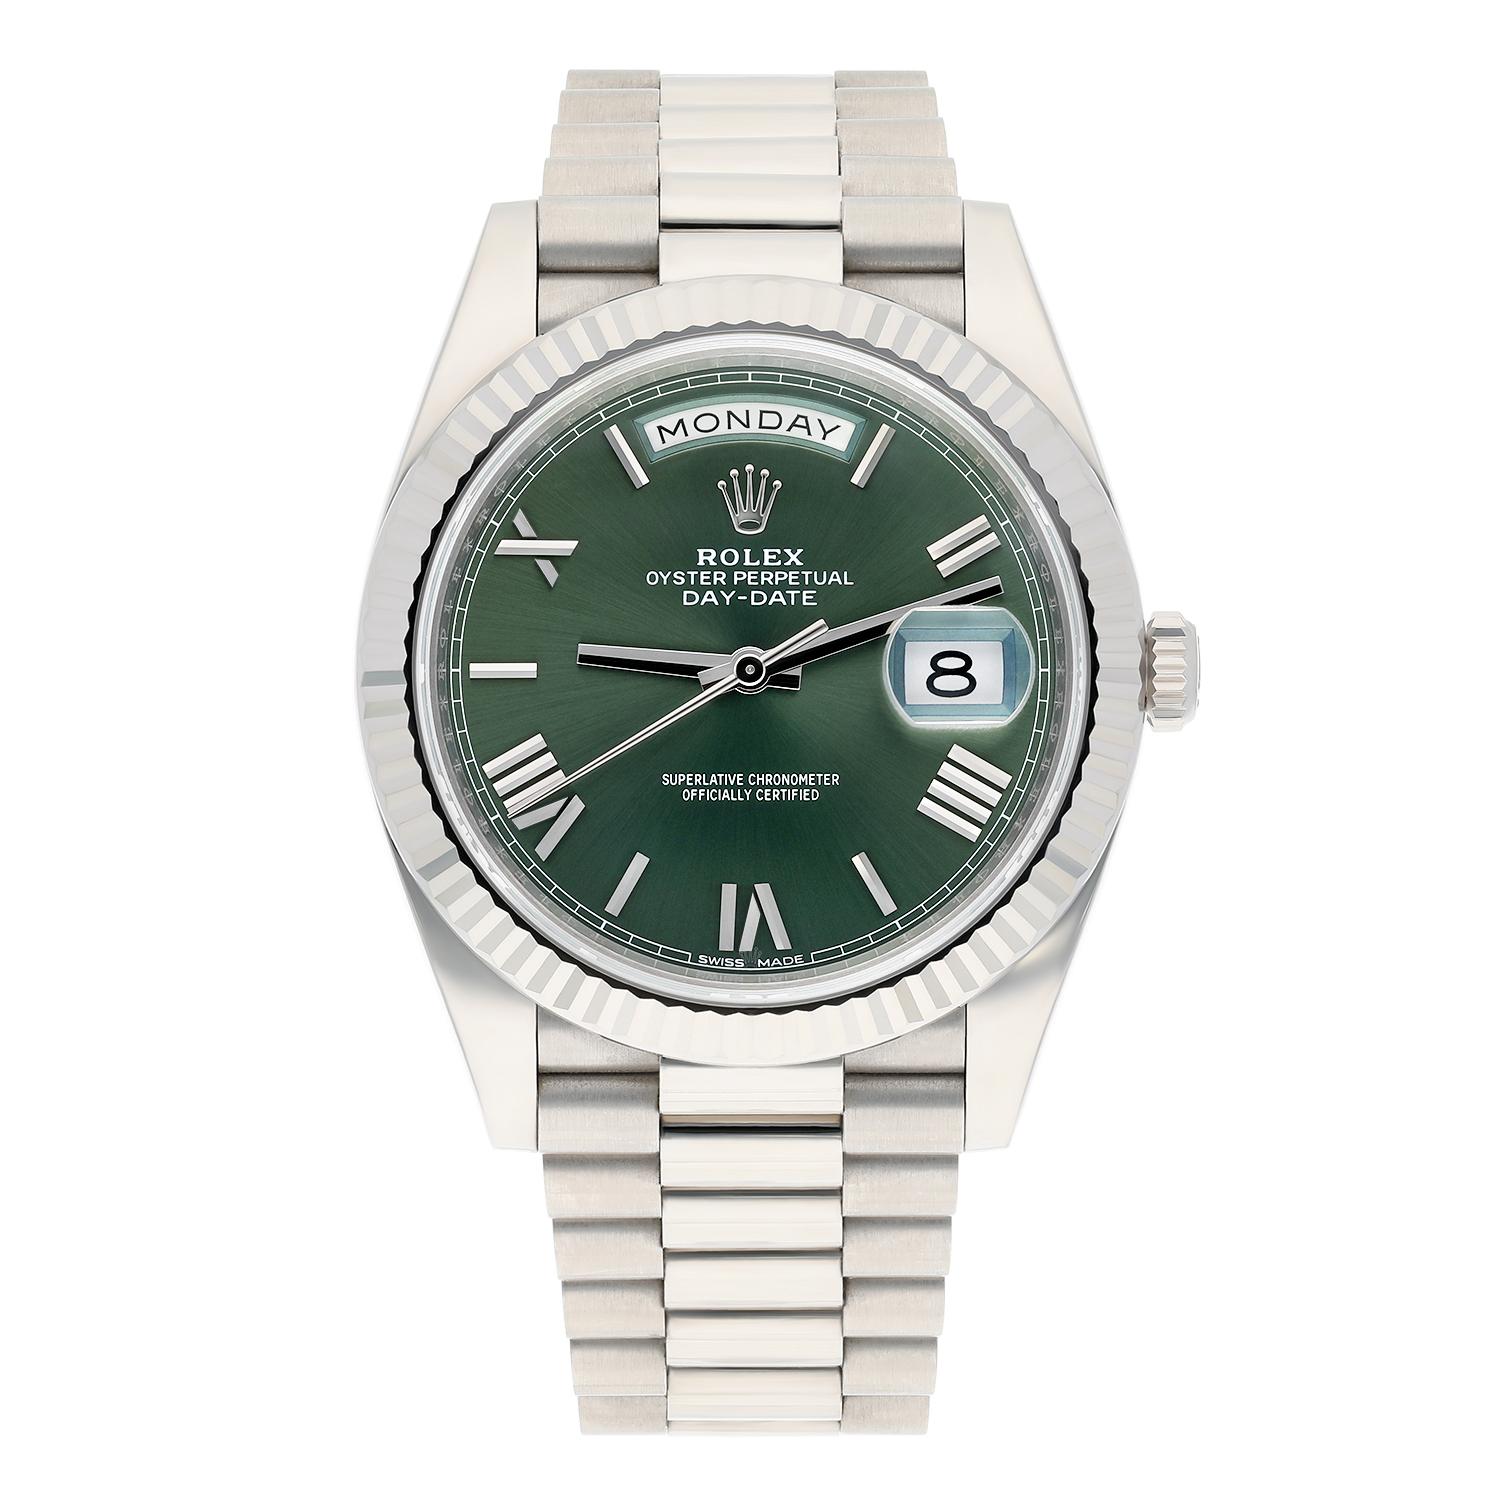 This is the Rolex Day-Date 40mm Anniversary model in solid 18ct white gold. The rare commemmorative olive-green Roman numeral dial was introduced to mark the 60th Anniversary of the Day-Date in 2016, and is the most sought-after of all the dial